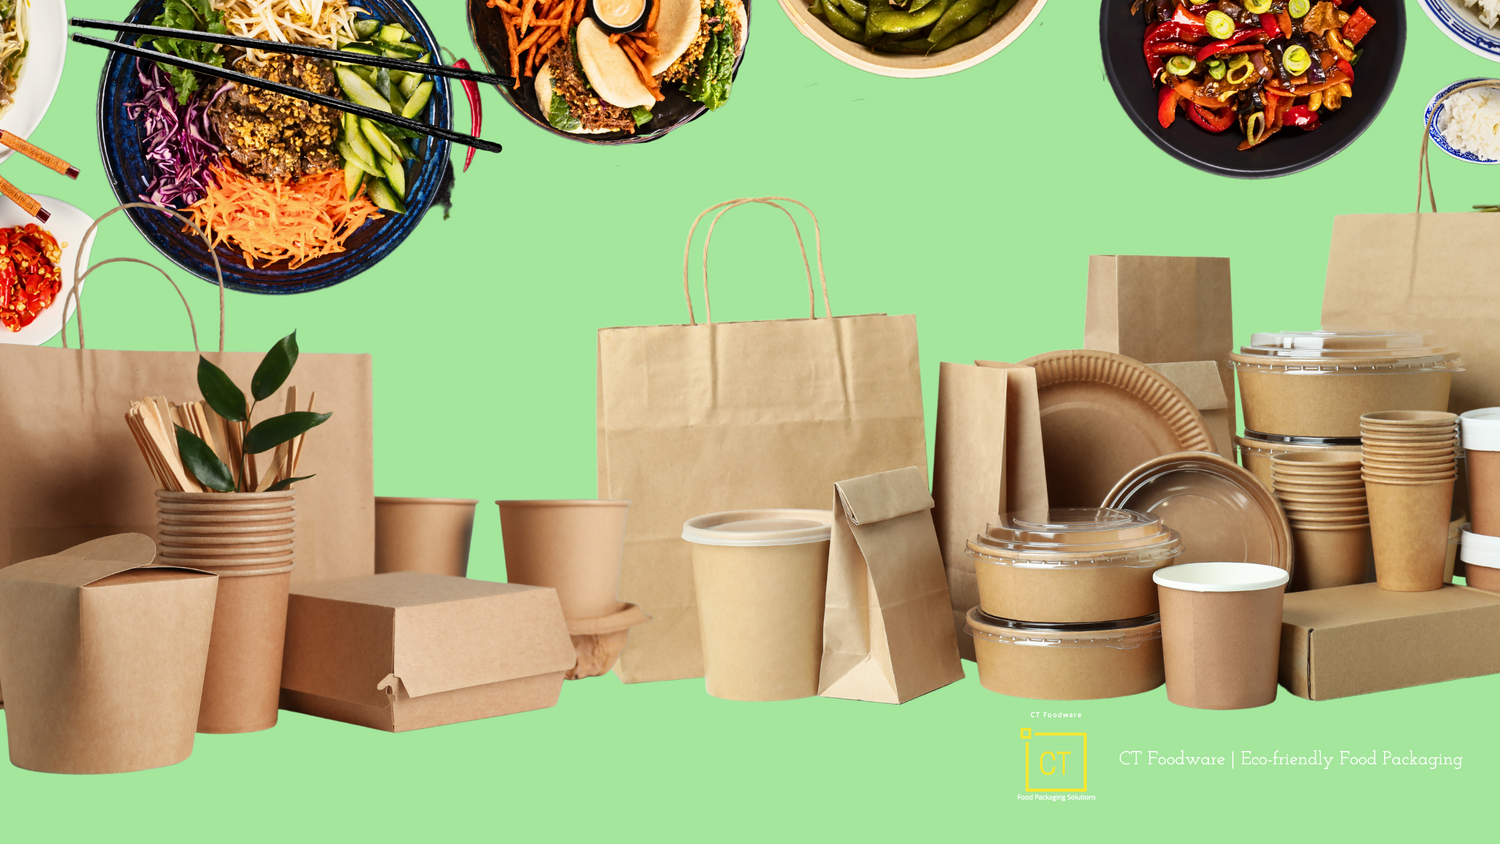 Sustainable & Eco-friendly Food Packaging | CT Foodware | Singapore